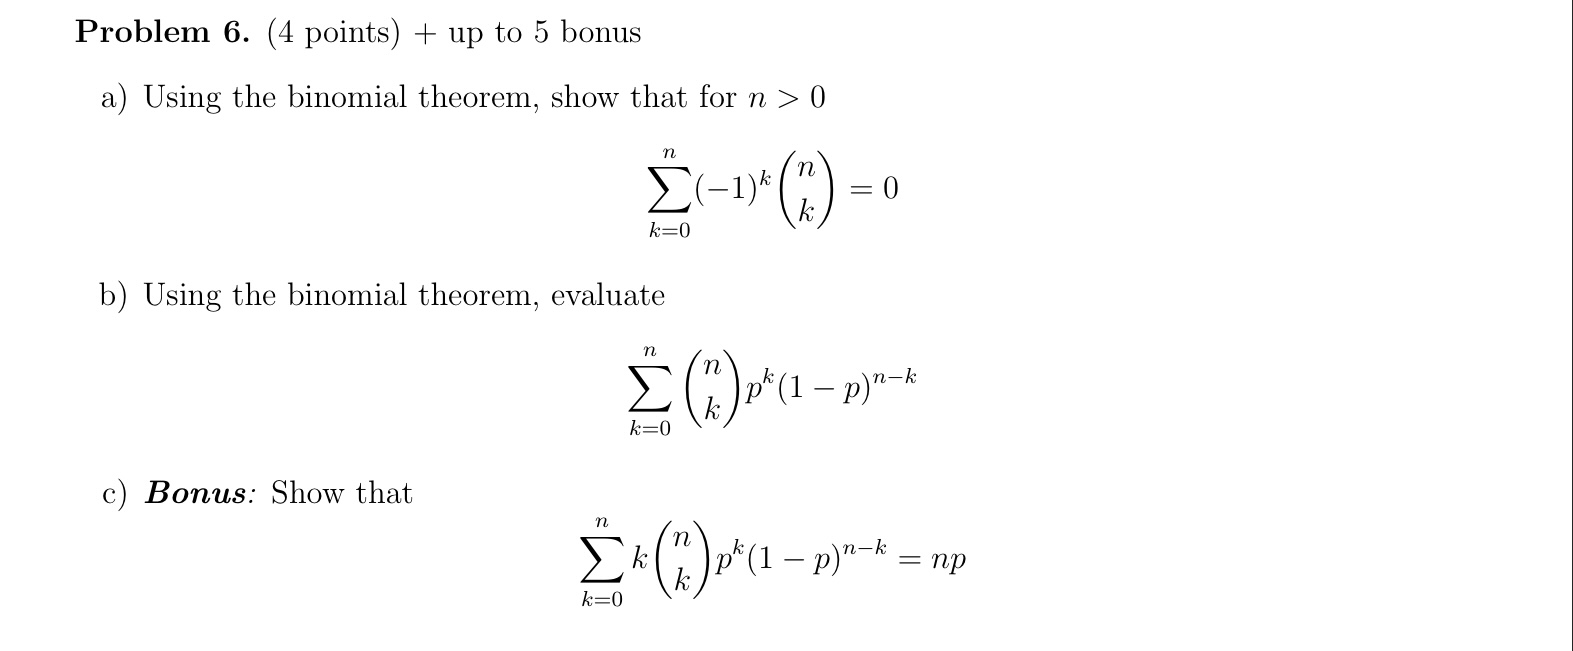 Solved a) Using the binomial theorem, show that for n>0